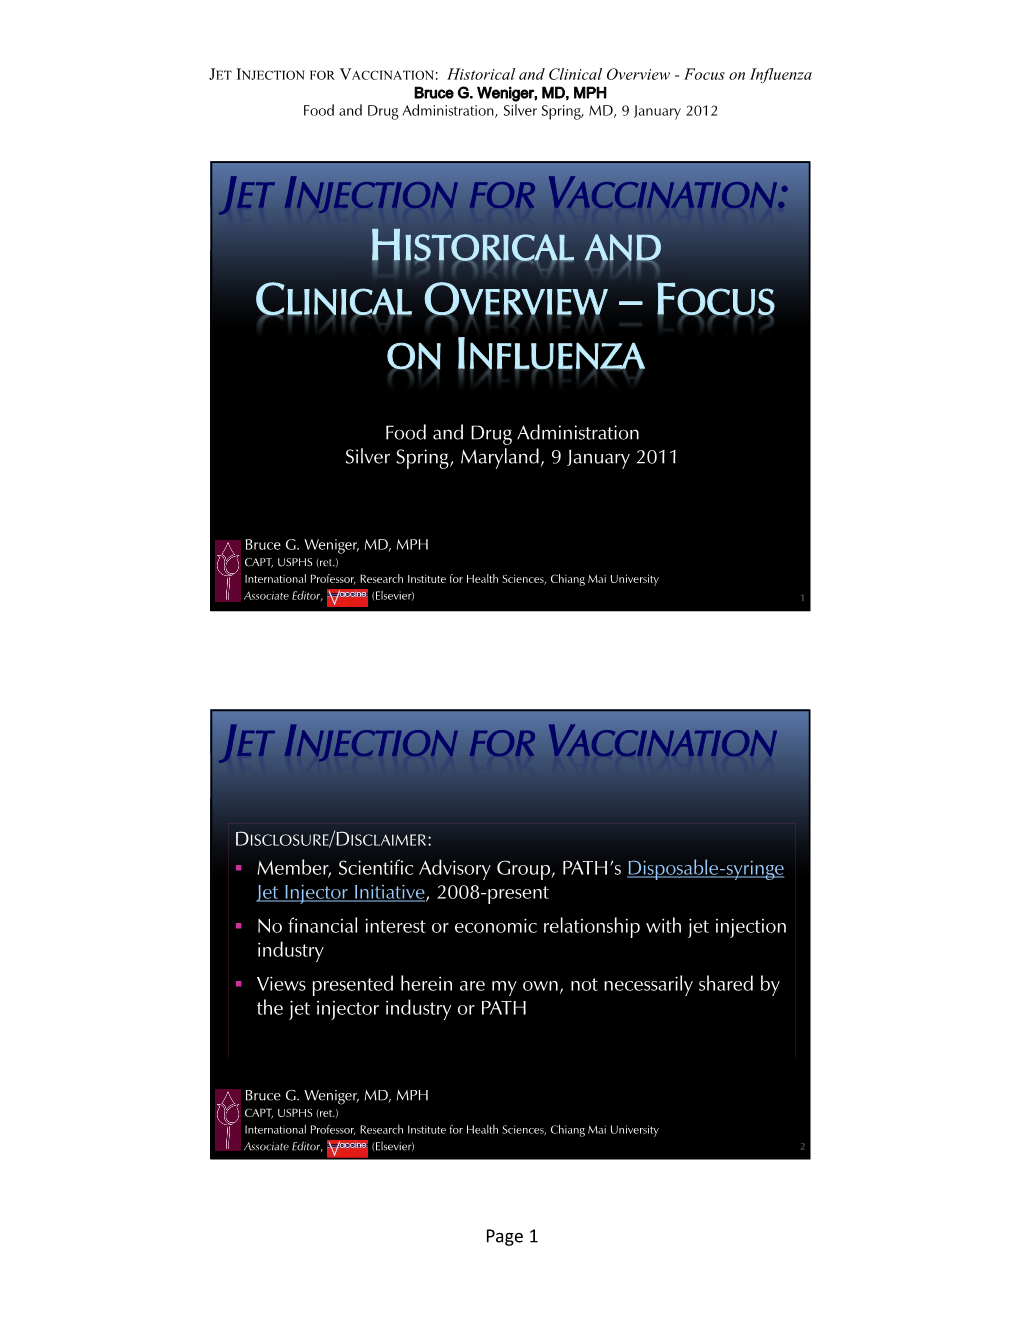 JET INJECTION for VACCINATION: Historical and Clinical Overview - Focus on Influenza Bruce G